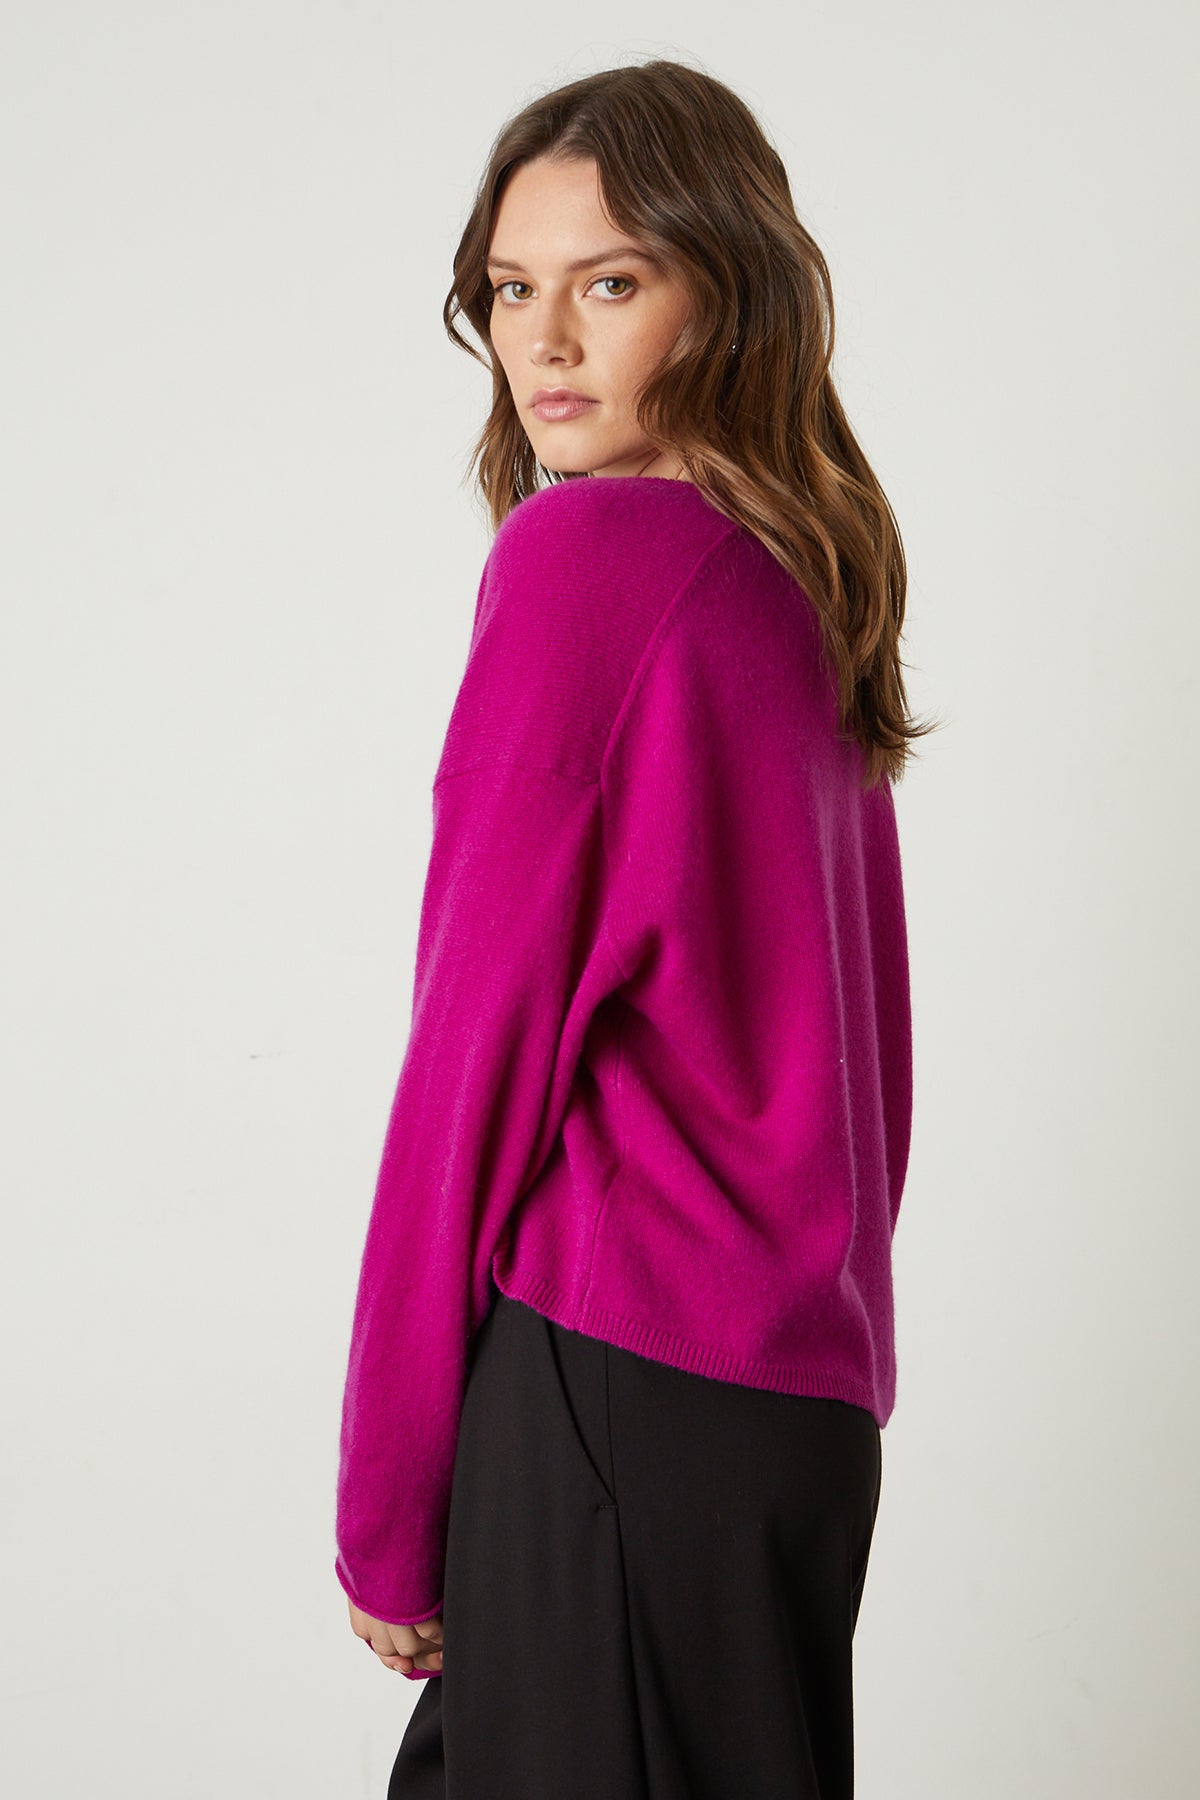 Amika Cashmere V-Neck Sweater in bright magenta pink with Leona pant side-25548550504641